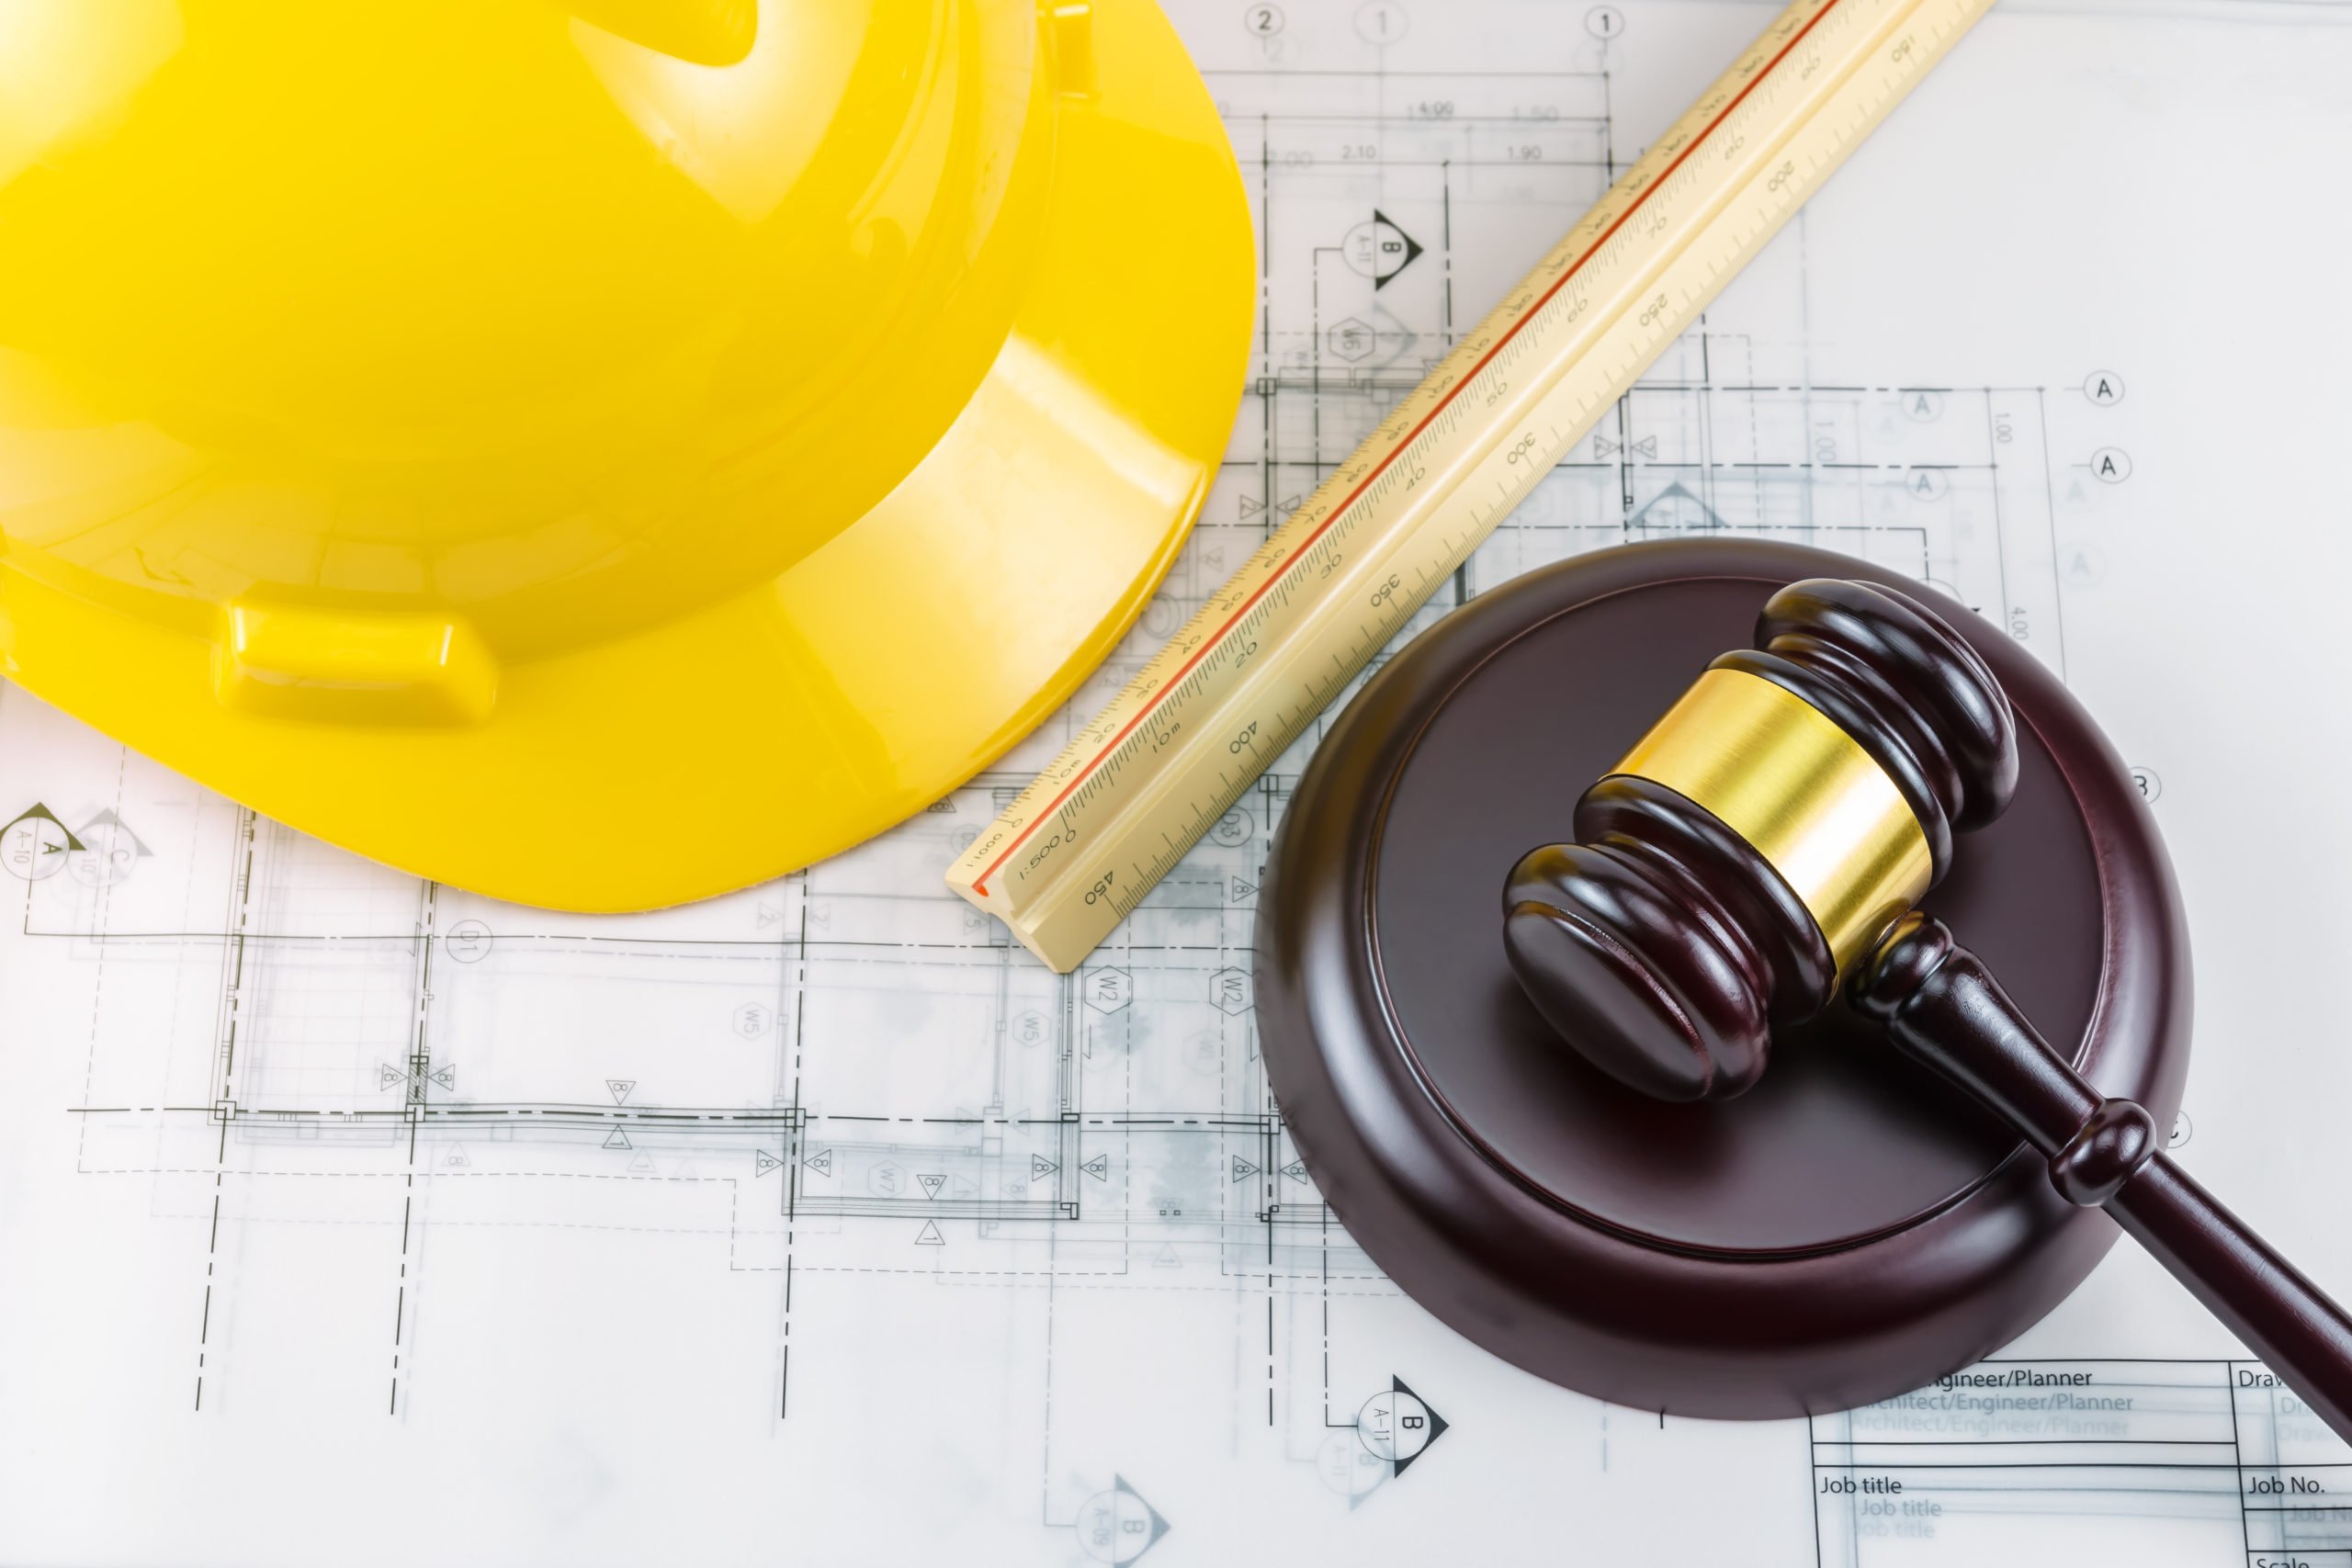 Gavel and yellow safety helmet